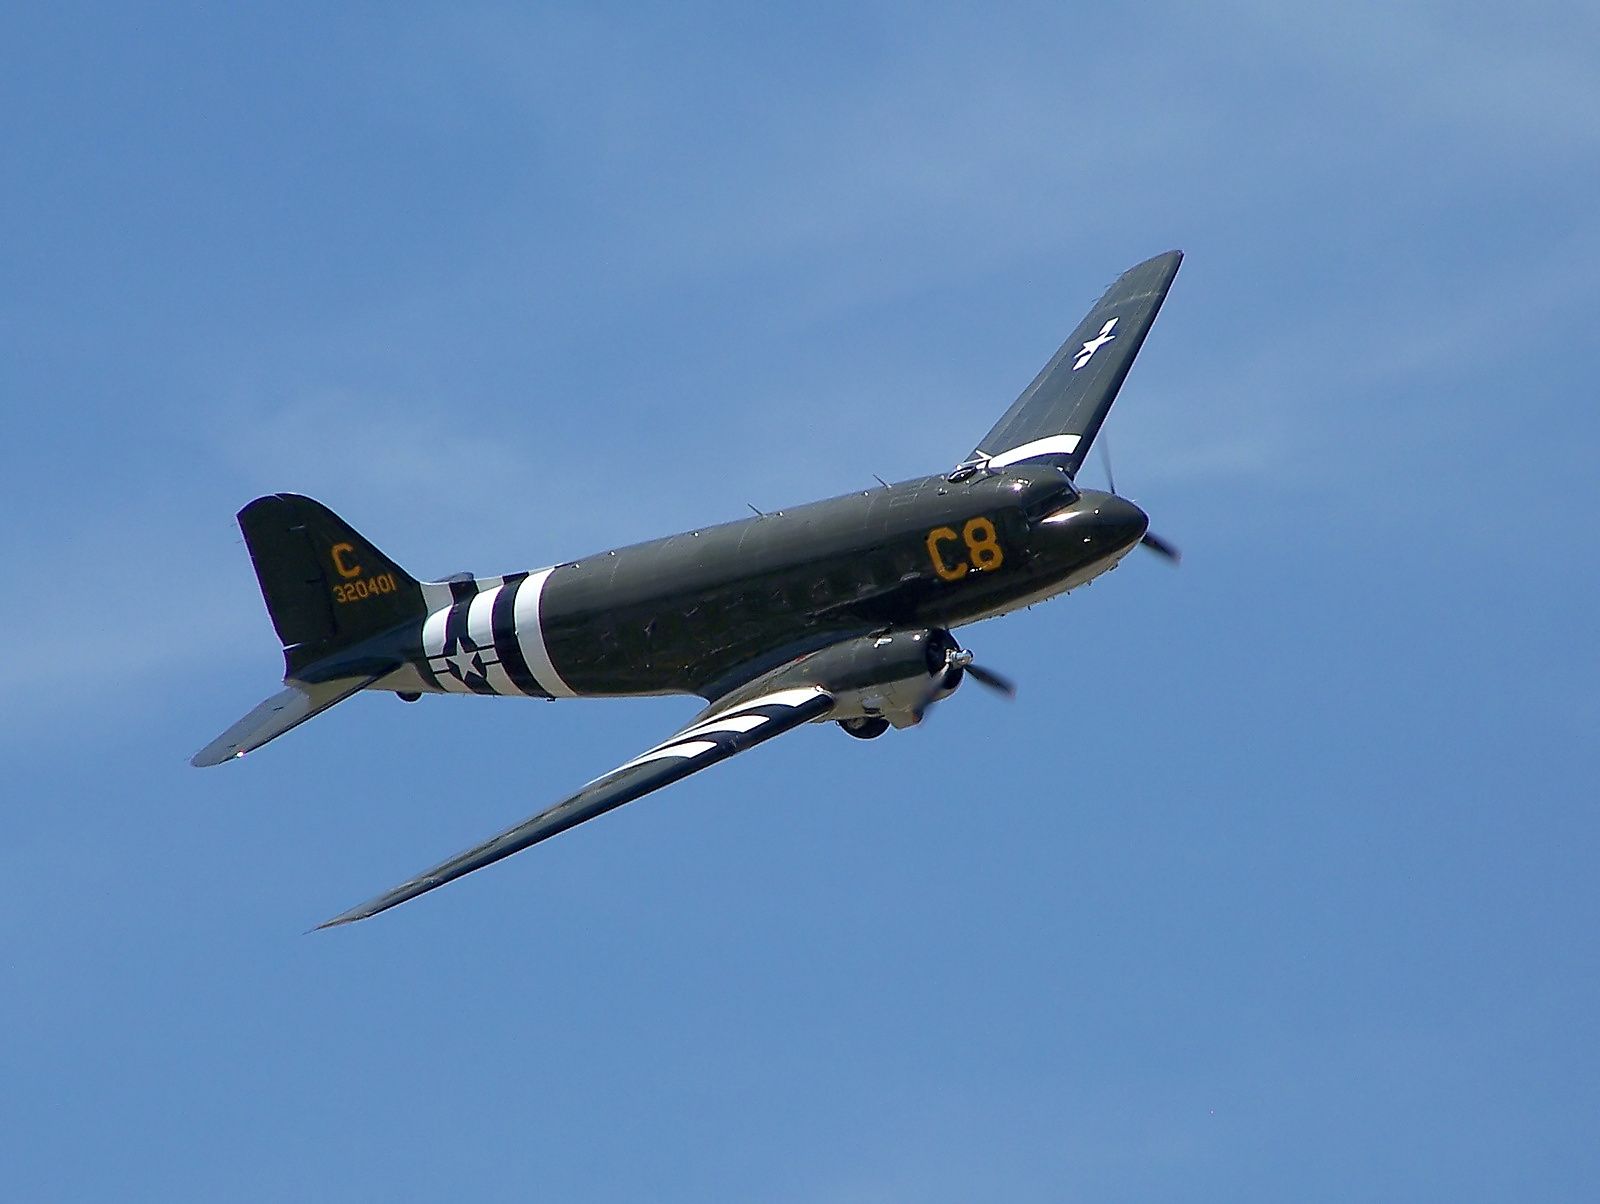 — — - C47 with D Day markings (Invasion Stripes)